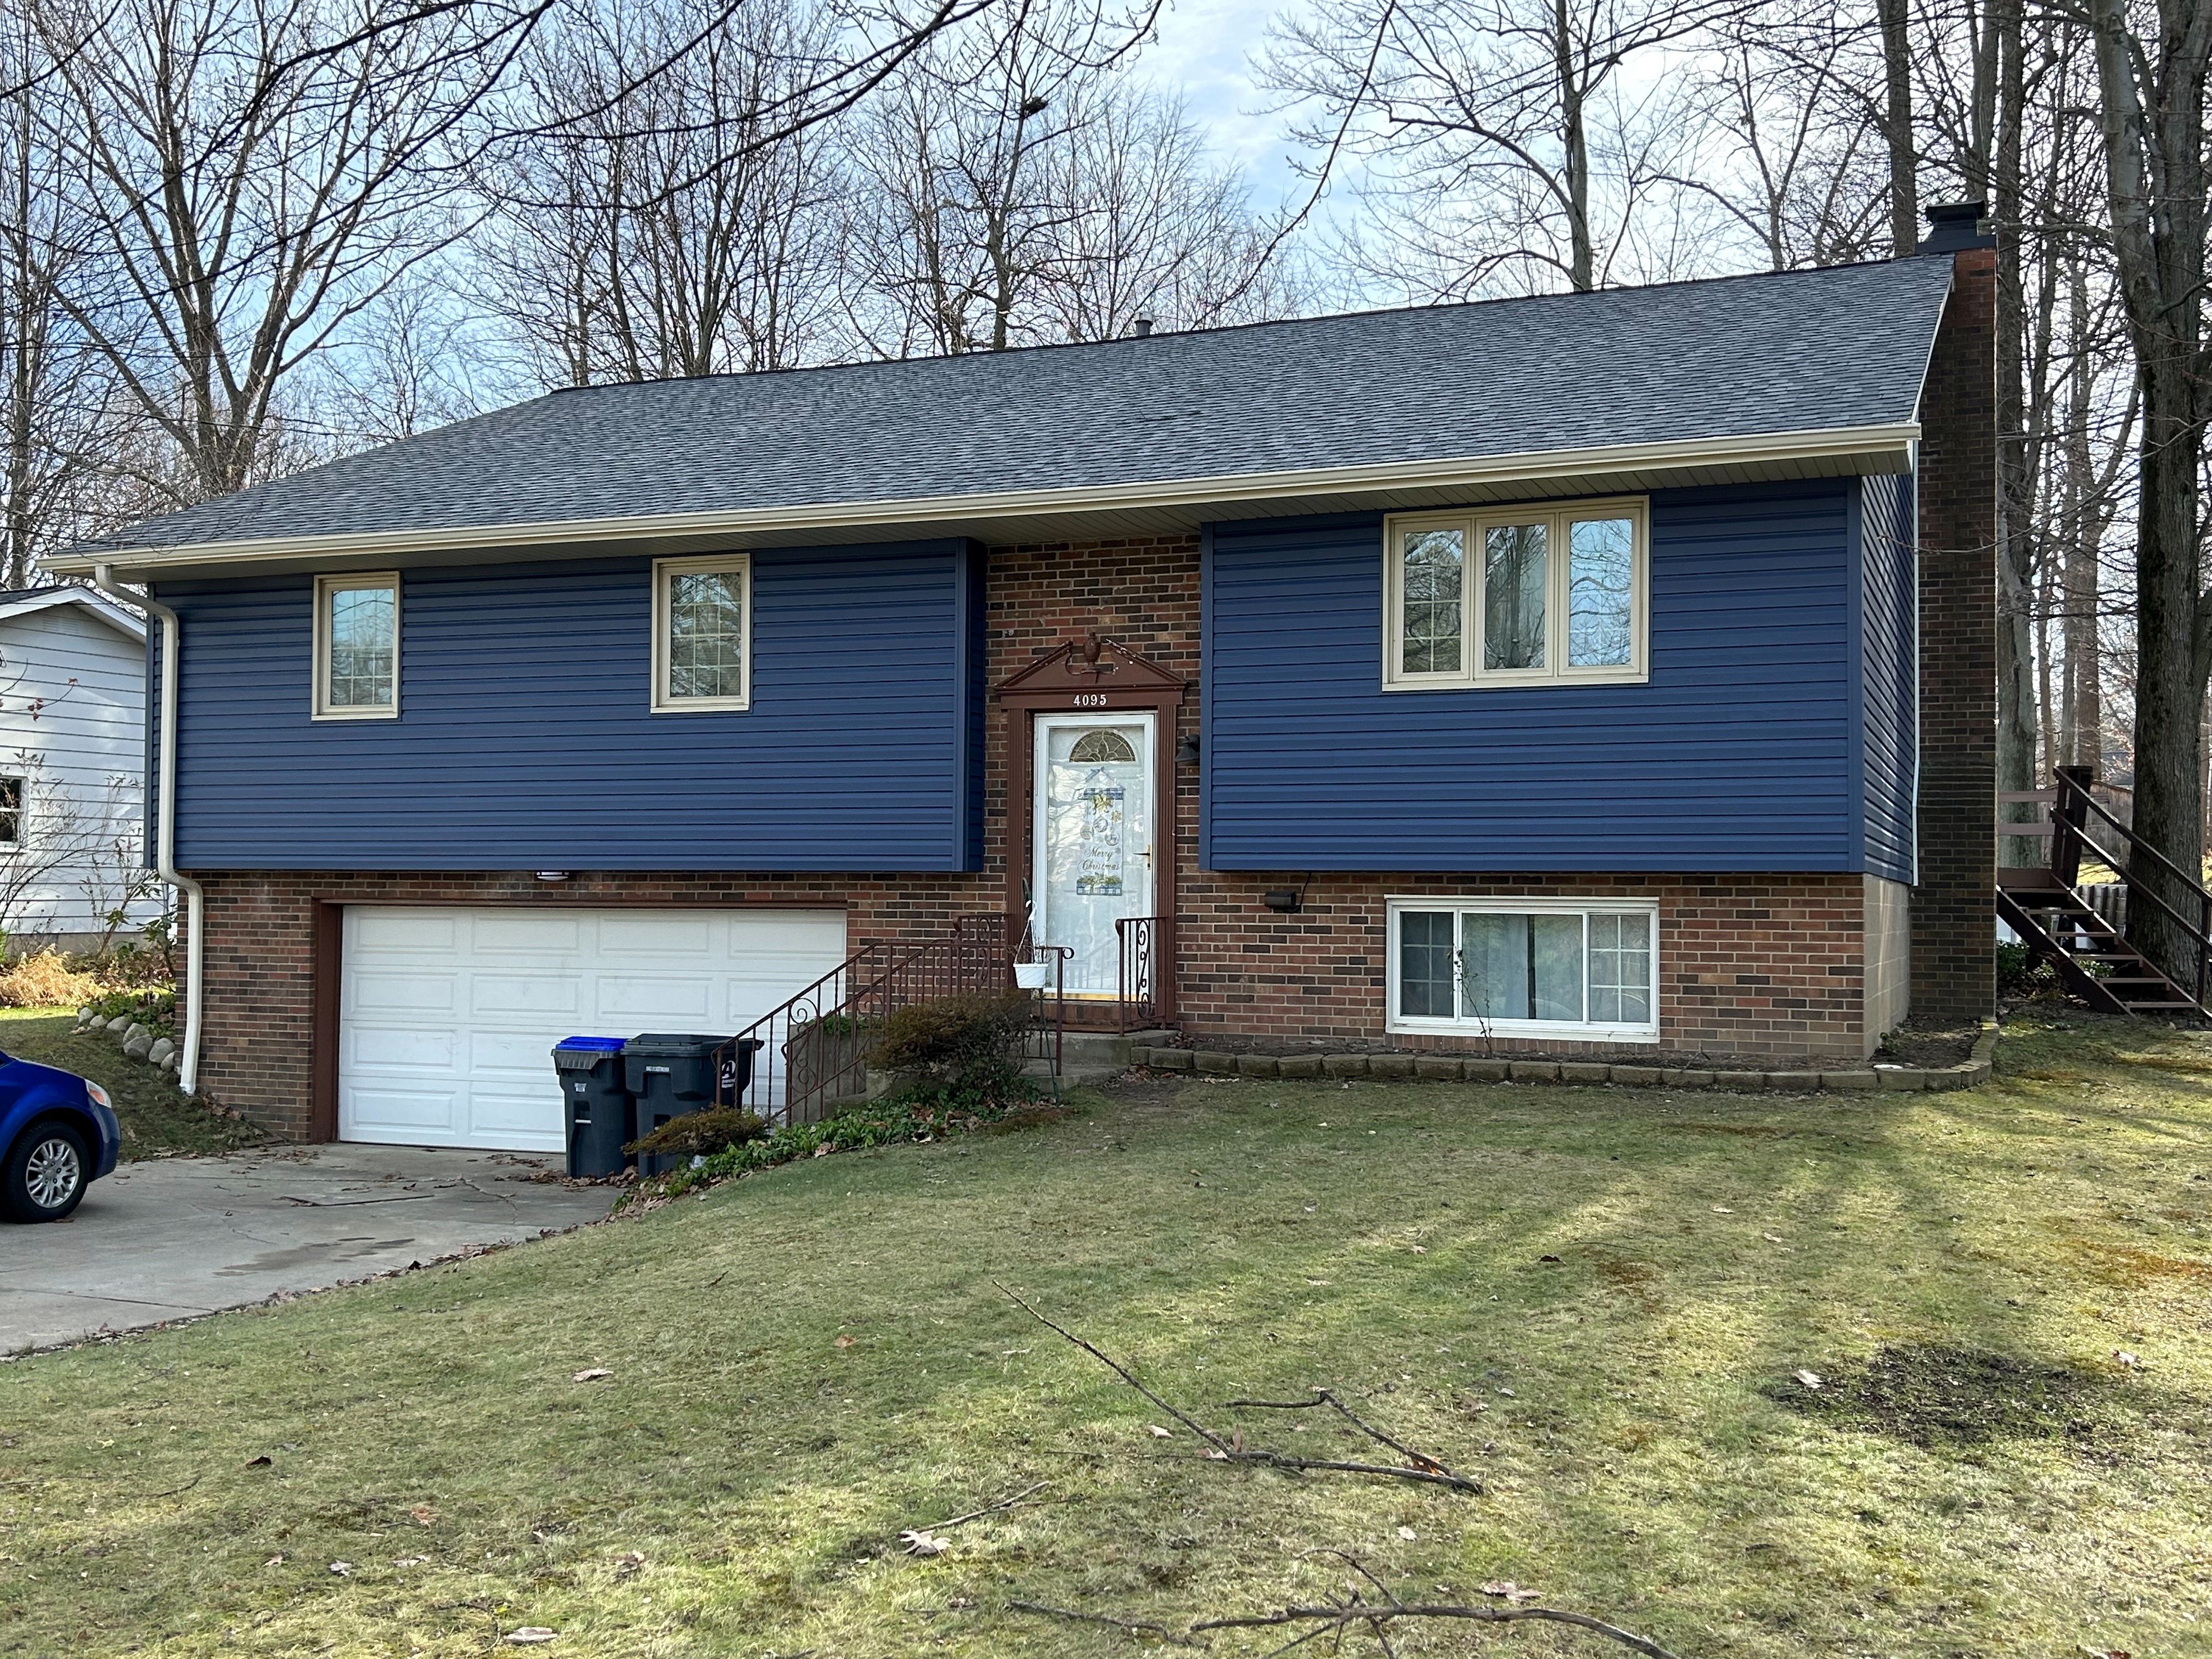 This home in Erie County, PA completed their update without going over budget.  They installed a new roof using Daugherty Roofing 814 and decided to repurpose their existing siding by painting it - giving the entire home a beautiful new look